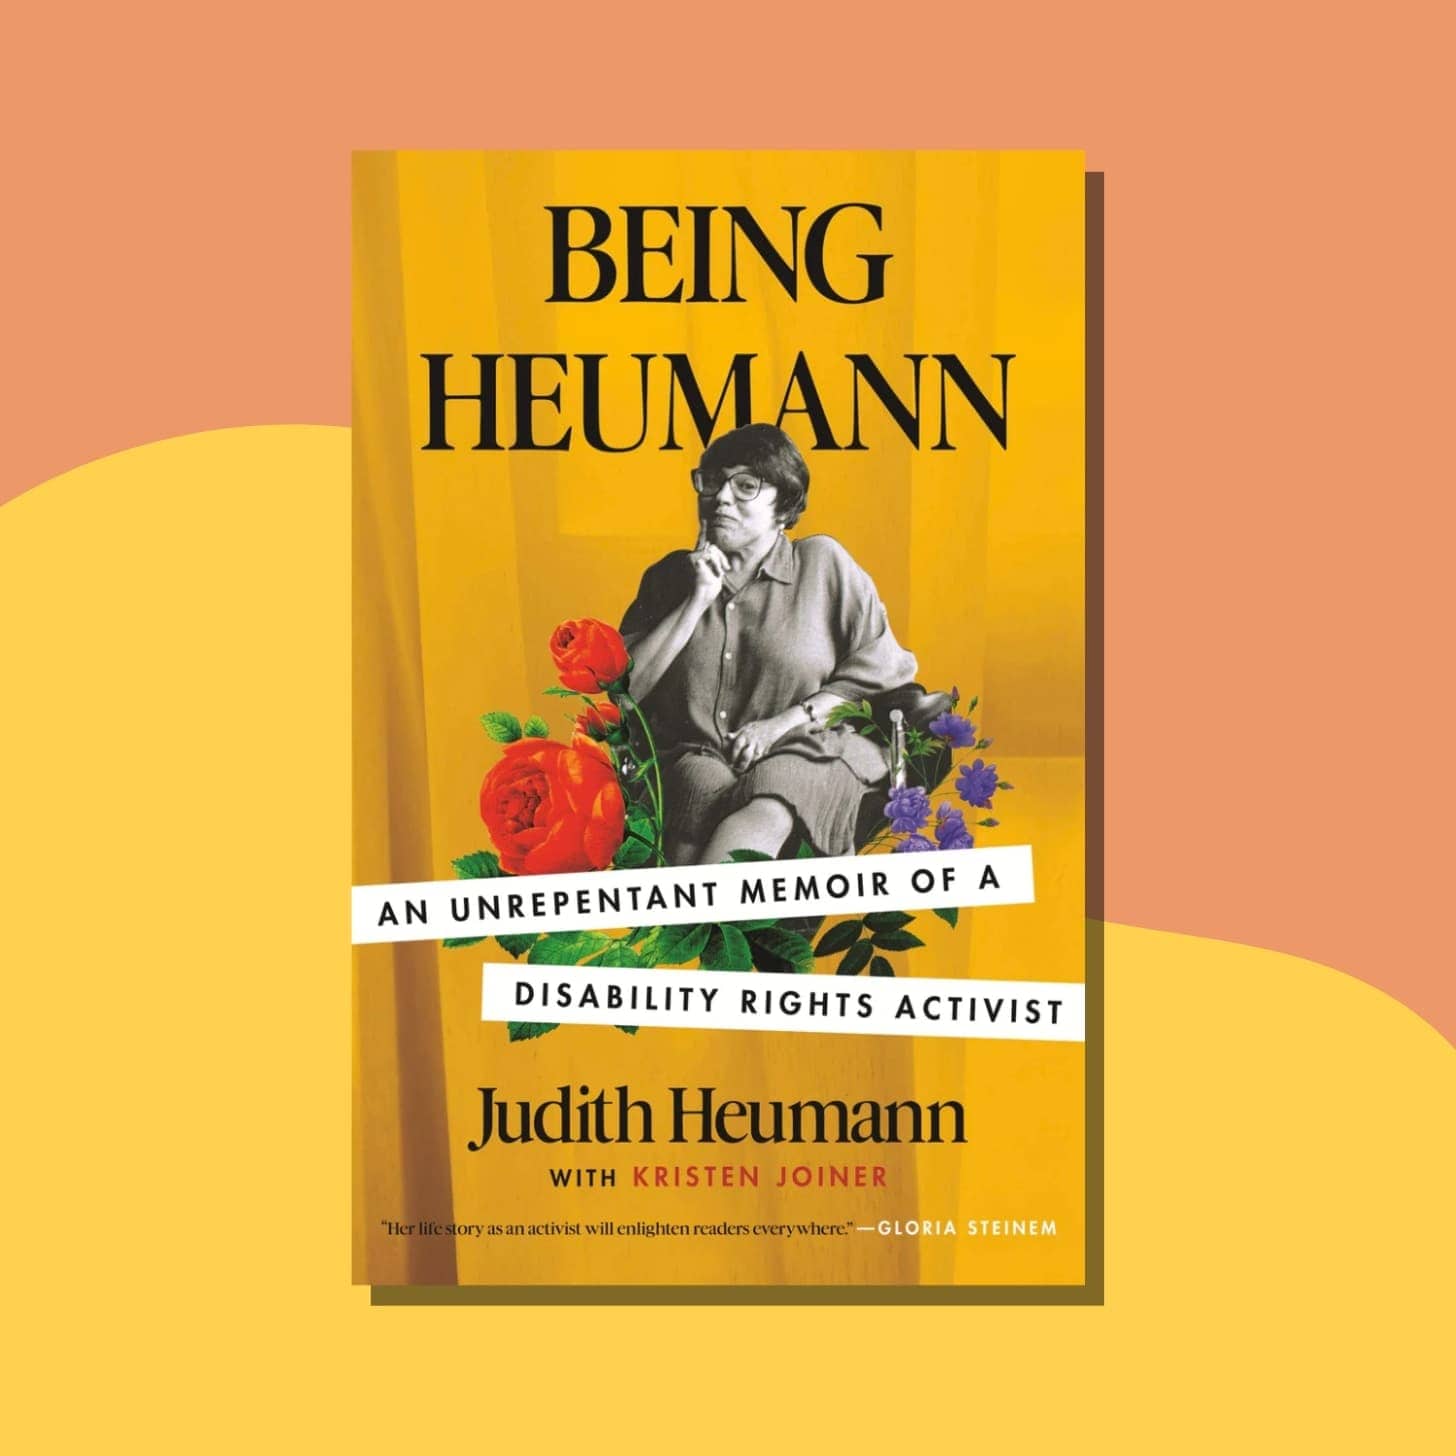 “Being Heumann: An Unrepentant Memoir of a Disability Rights Activist” by Judith Heumann - Cover has Judith smiling in her chair in black and white with colorful flowers